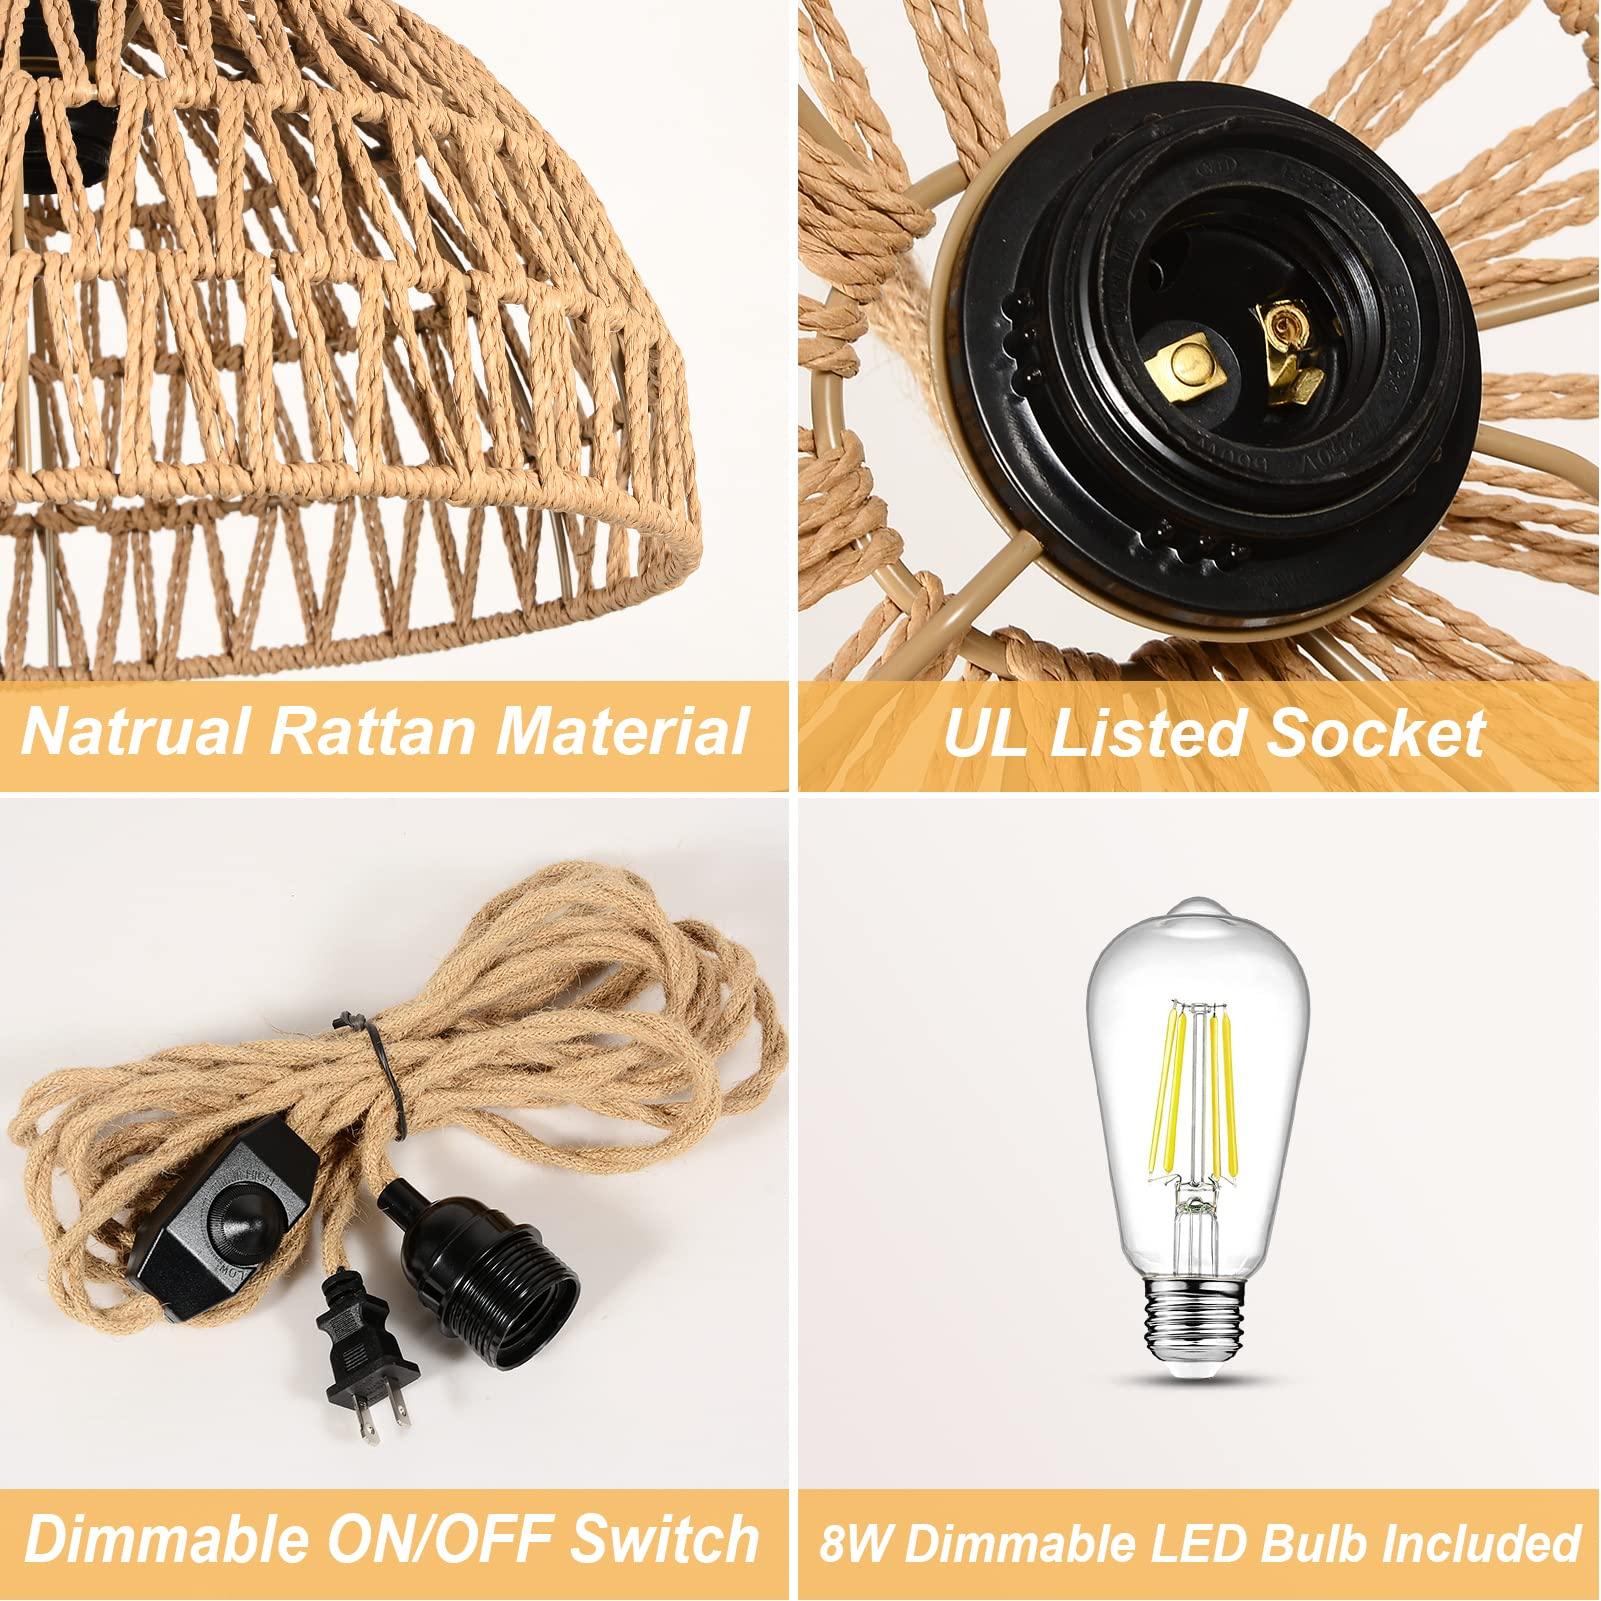 HMVPL Rattan Hanging Lights with Plug in Cord Dimmable LED Bulb Included, Wicker Plug in Pendant Light Fixture, Boho Plug in Chandelier, Hanging Lamp for Bedroom, Kitchen, Nursery, Living Room - HMVPL